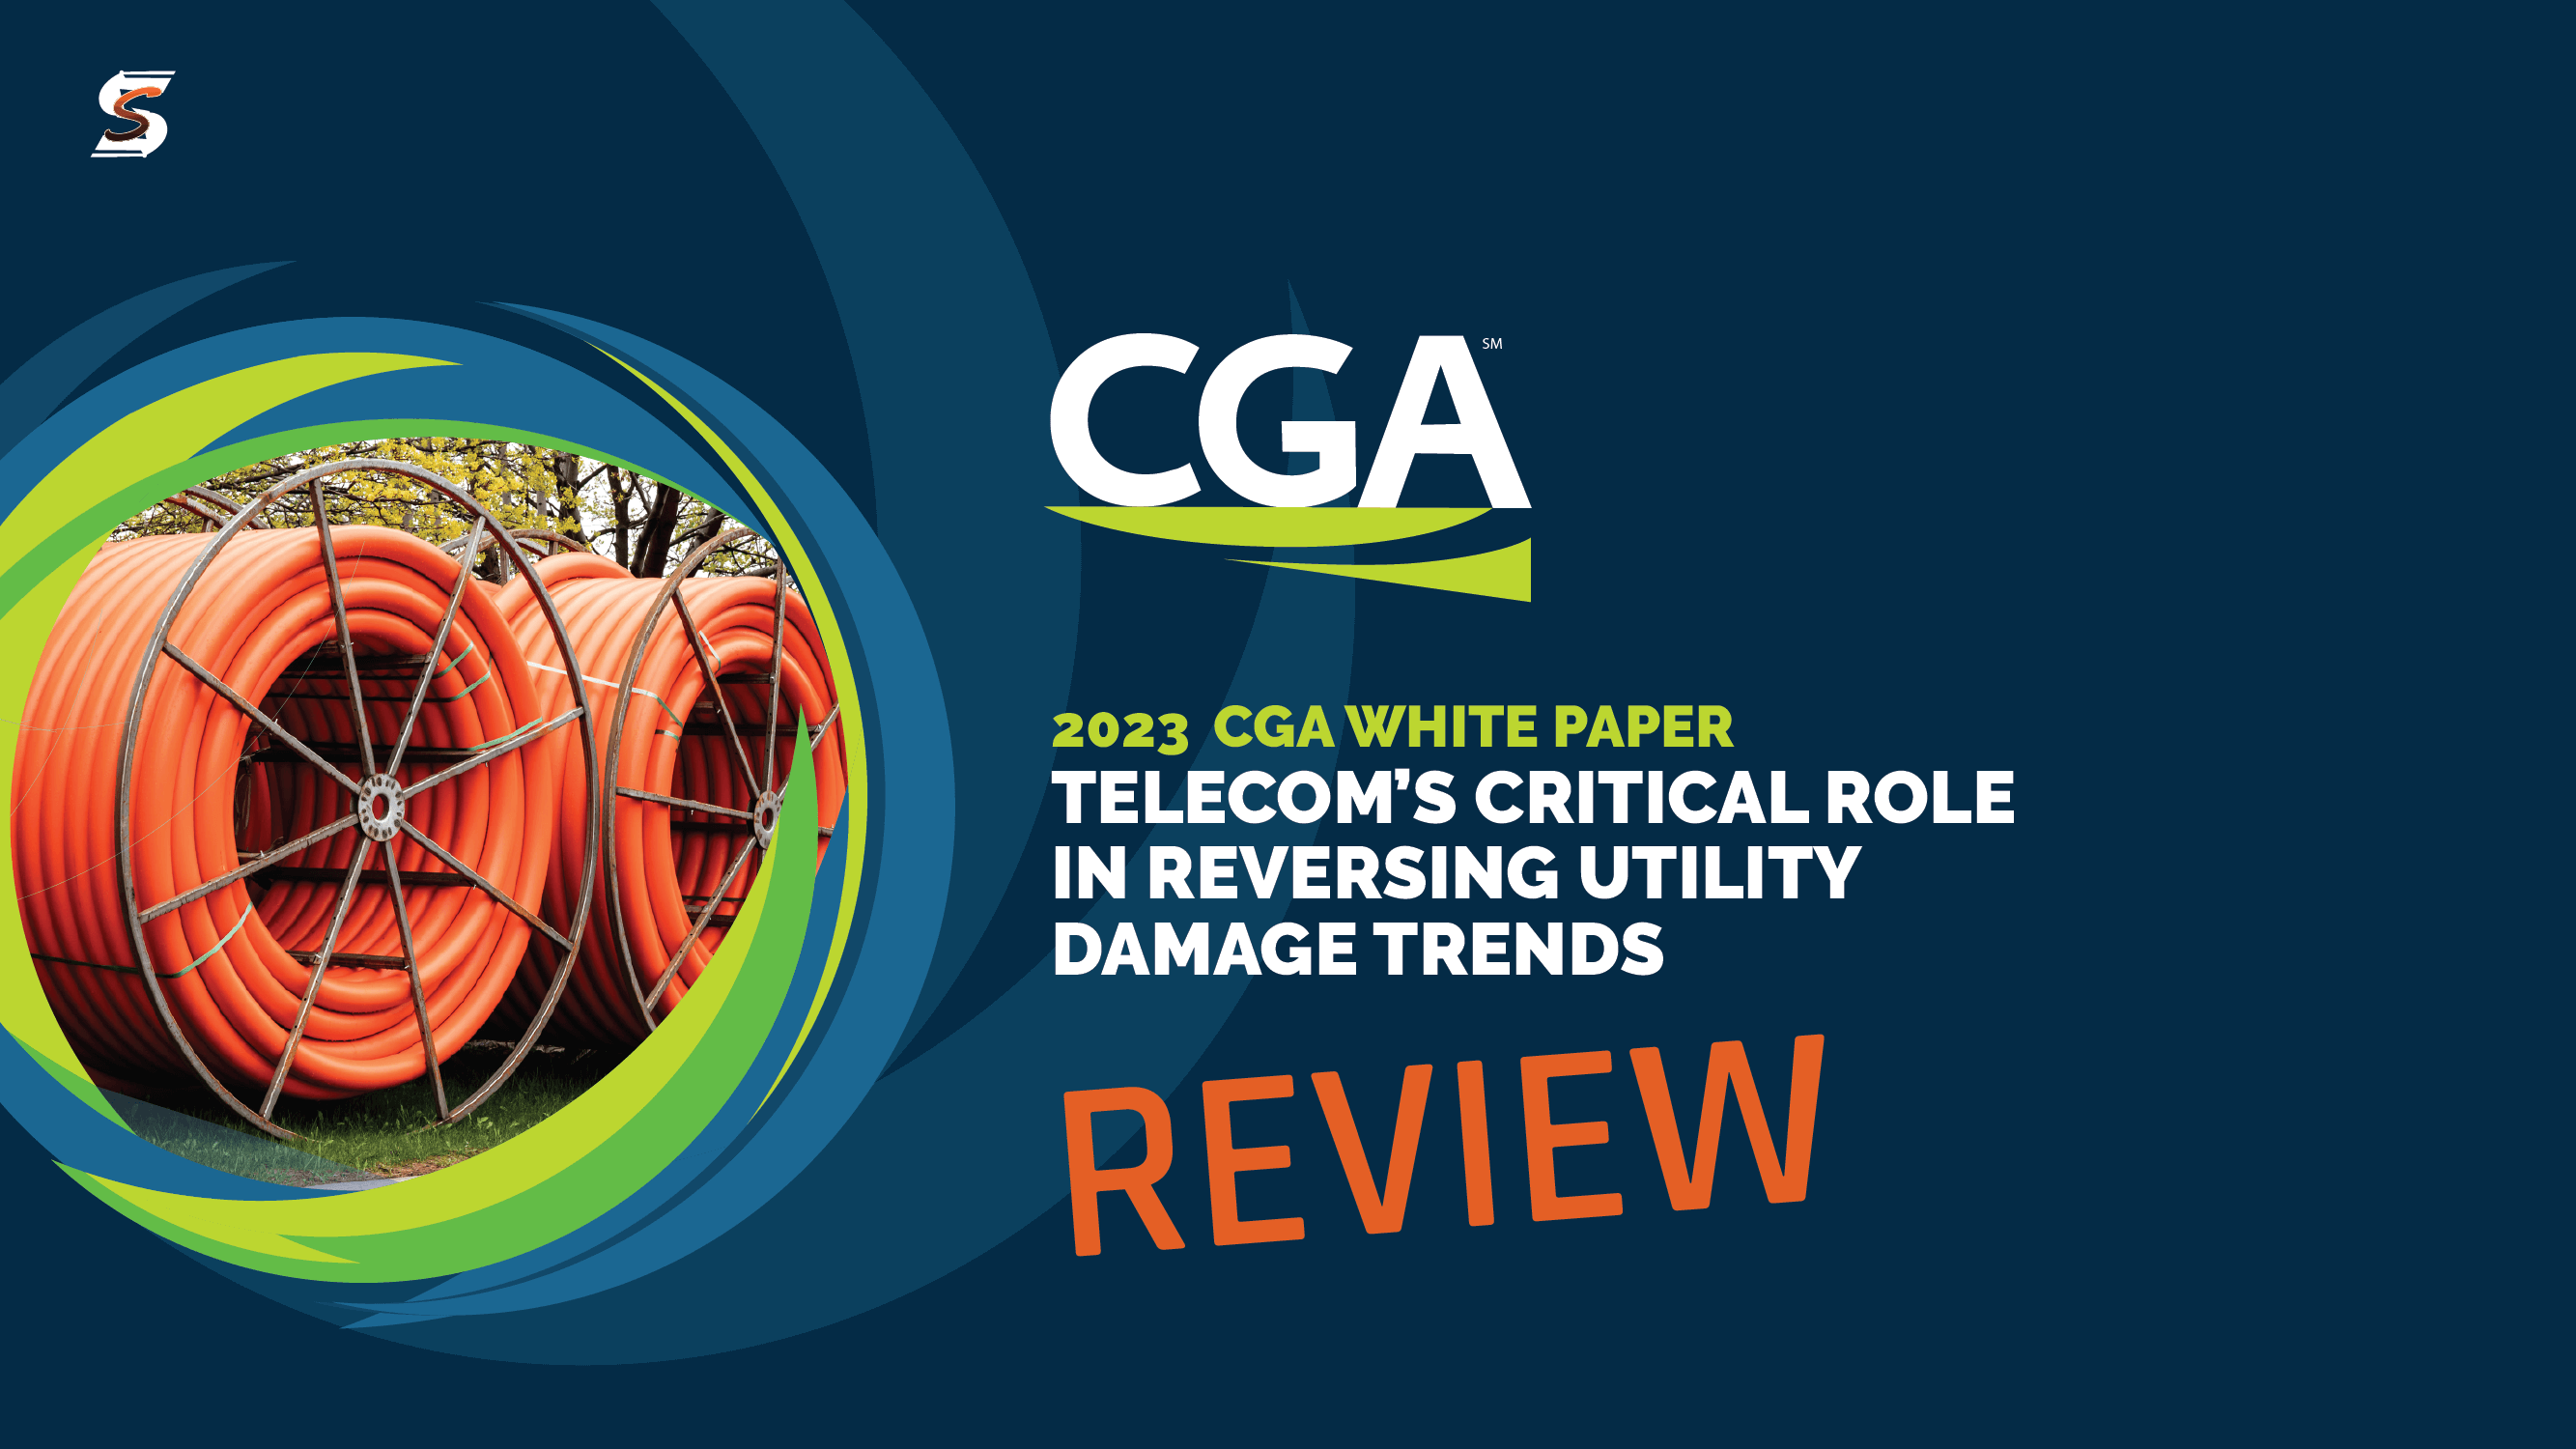 Featured image for “CGA TELECOM WHITE PAPER REVIEW”